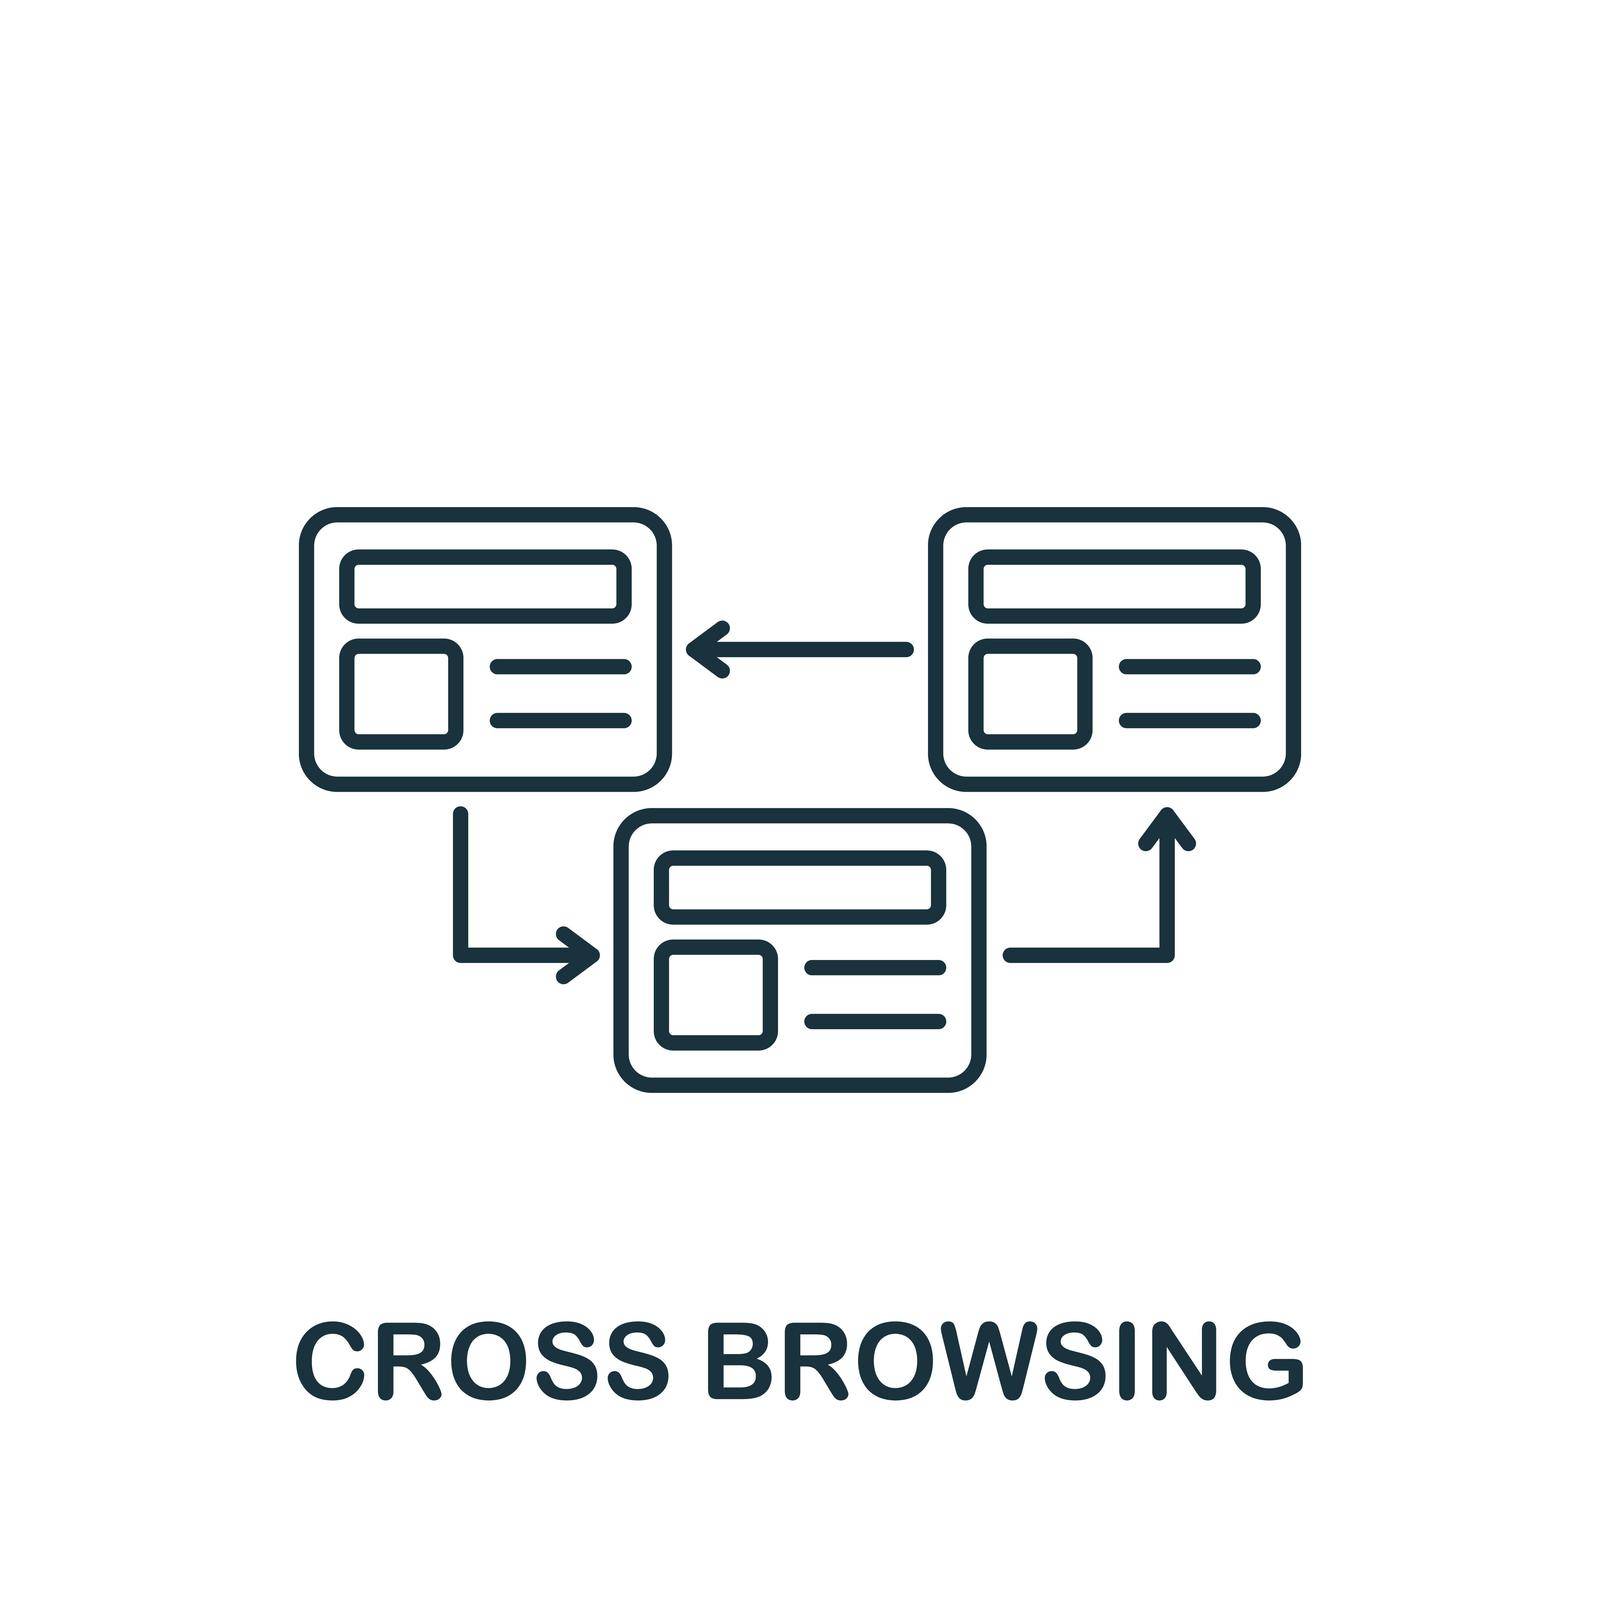 Cross Browsing icon. Simple line element web development symbol for templates, web design and infographics..